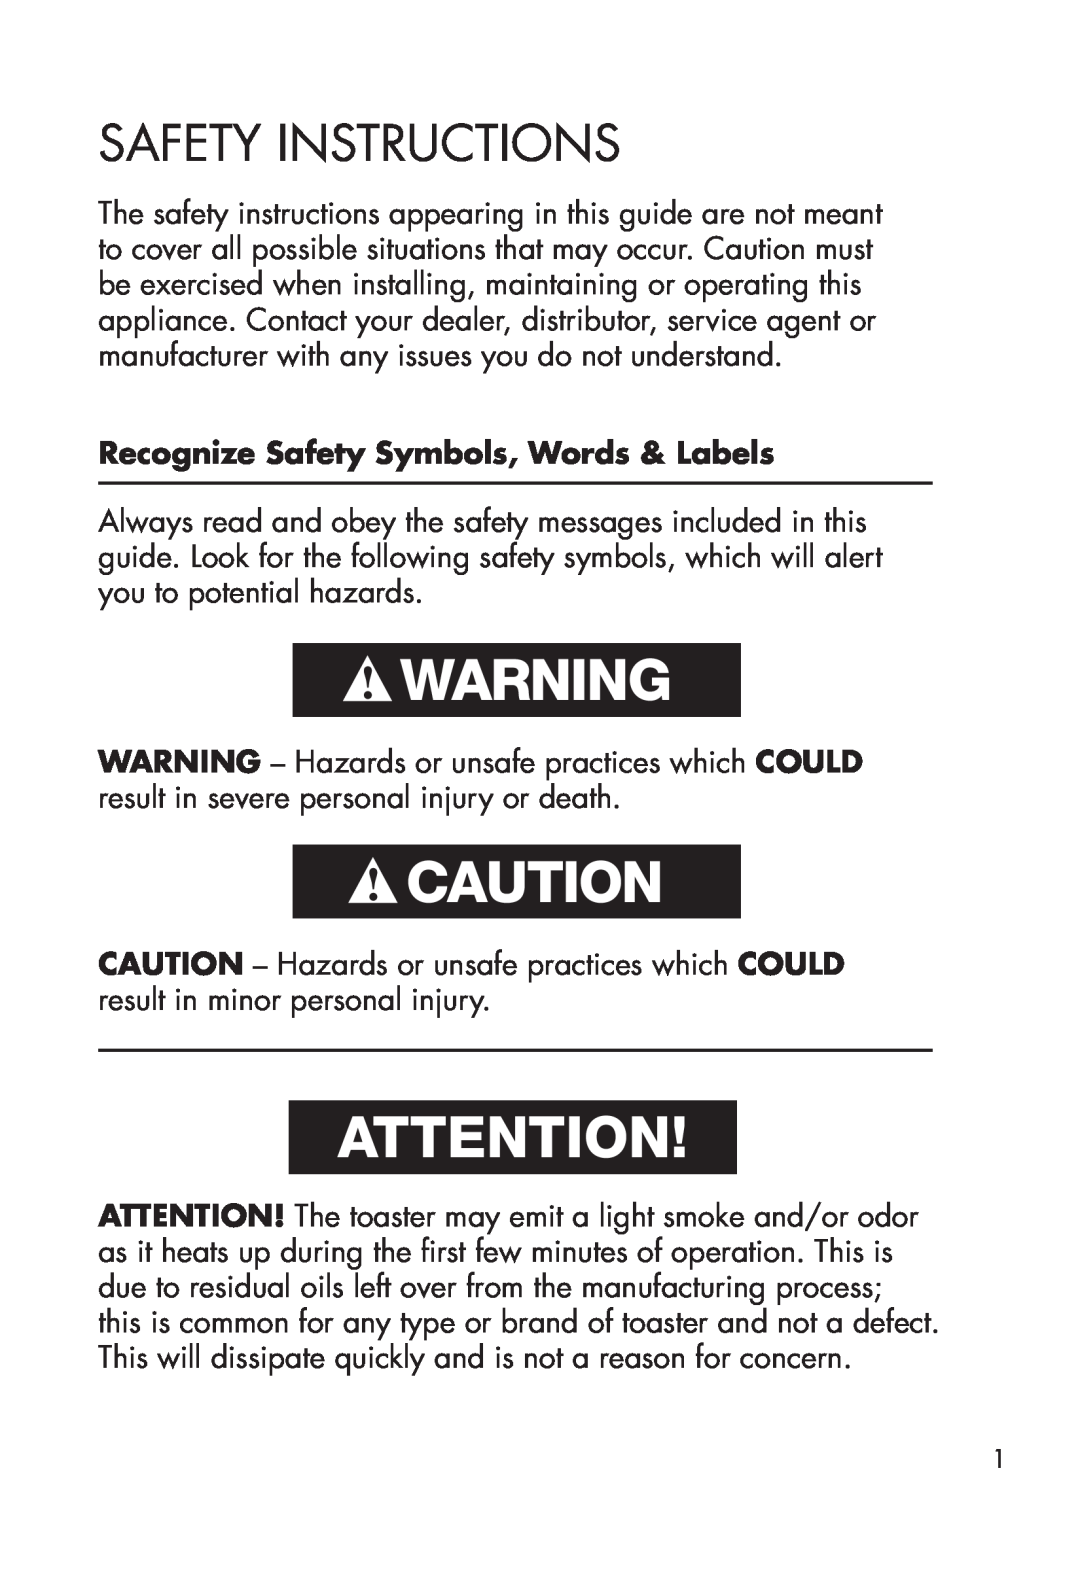 Calphalon 1779206, 1779207 manual Safety Instructions, Recognize Safety Symbols, Words & Labels 